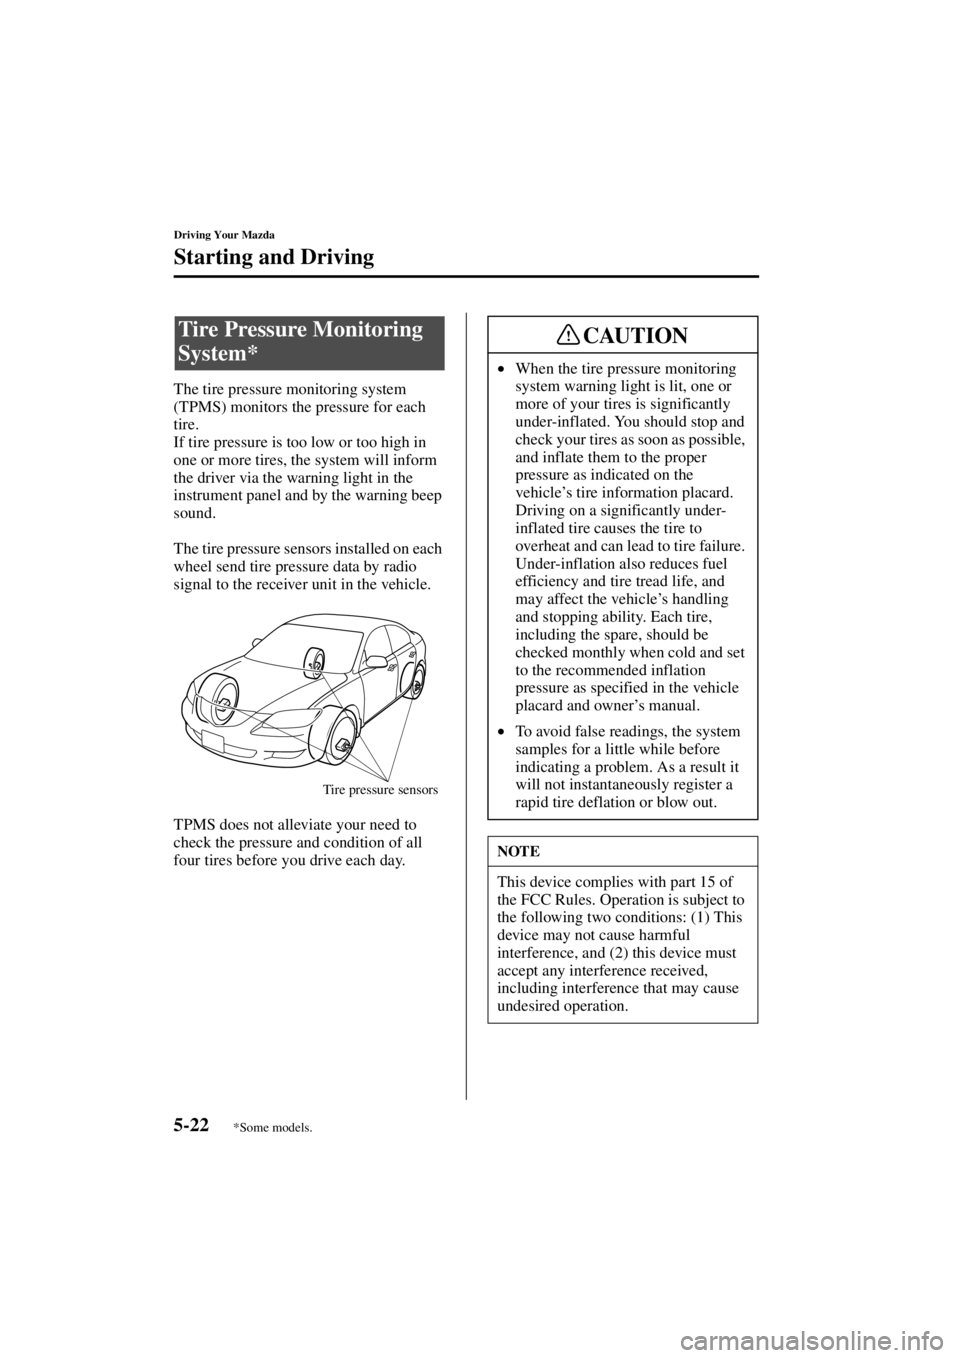 MAZDA MODEL 3 5-DOOR 2004  Owners Manual 5-22
Driving Your Mazda
Starting and Driving
Form No. 8S18-EA-03I
The tire pressure monitoring system 
(TPMS) monitors the pressure for each 
tire.
If tire pressure is too low or too high in 
one or m